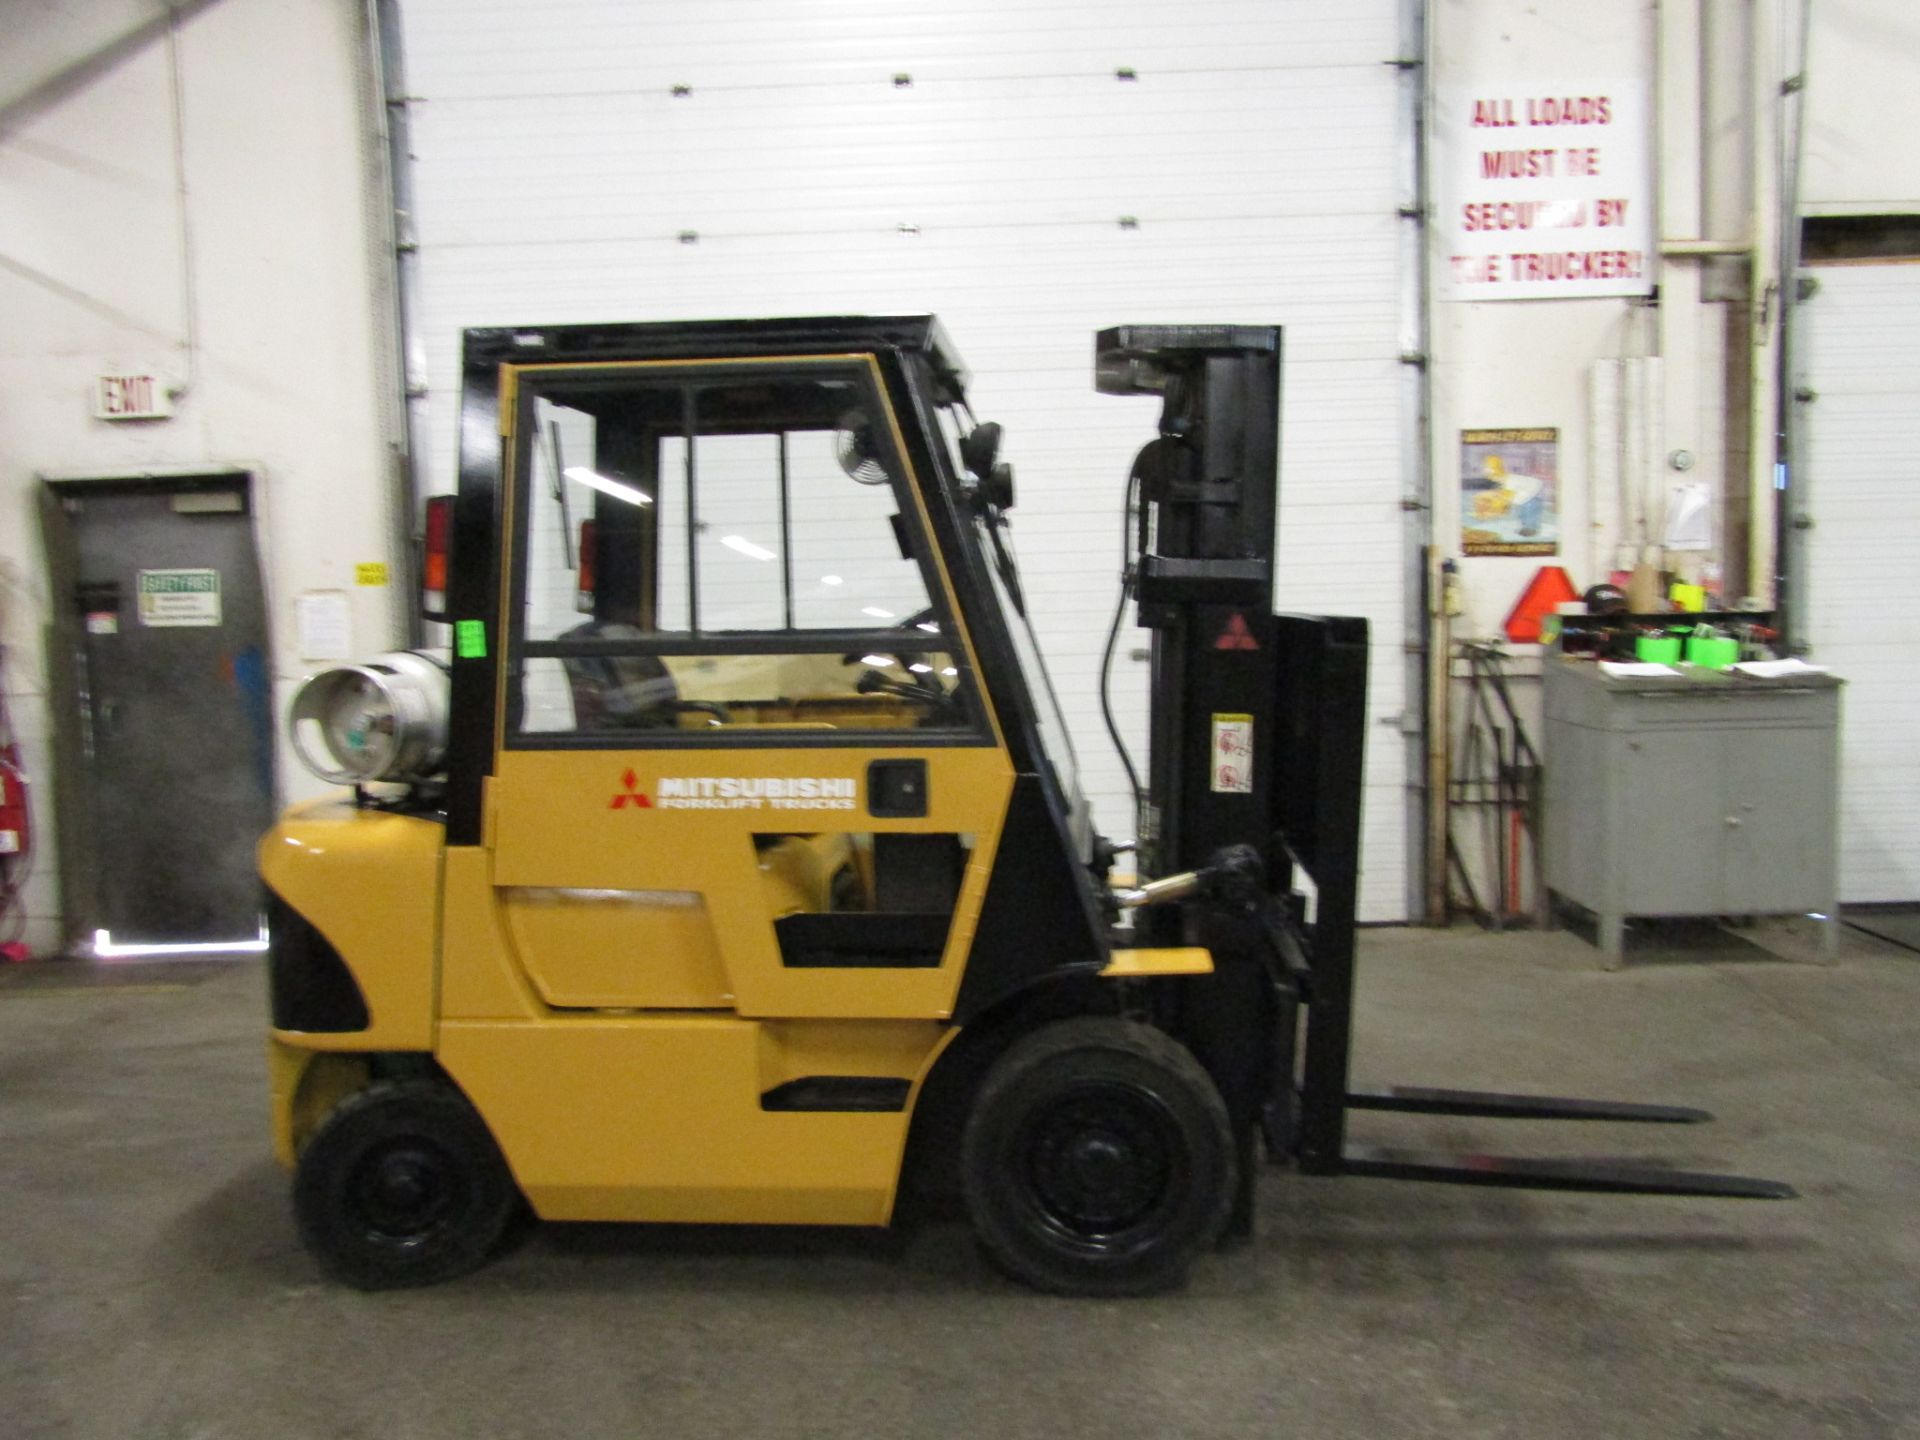 FREE CUSTOMS DOCS & 0 DUTY FEES - Mitsubishi 5000lbs Capacity OUTDOOR Forklift with 3-stage mast